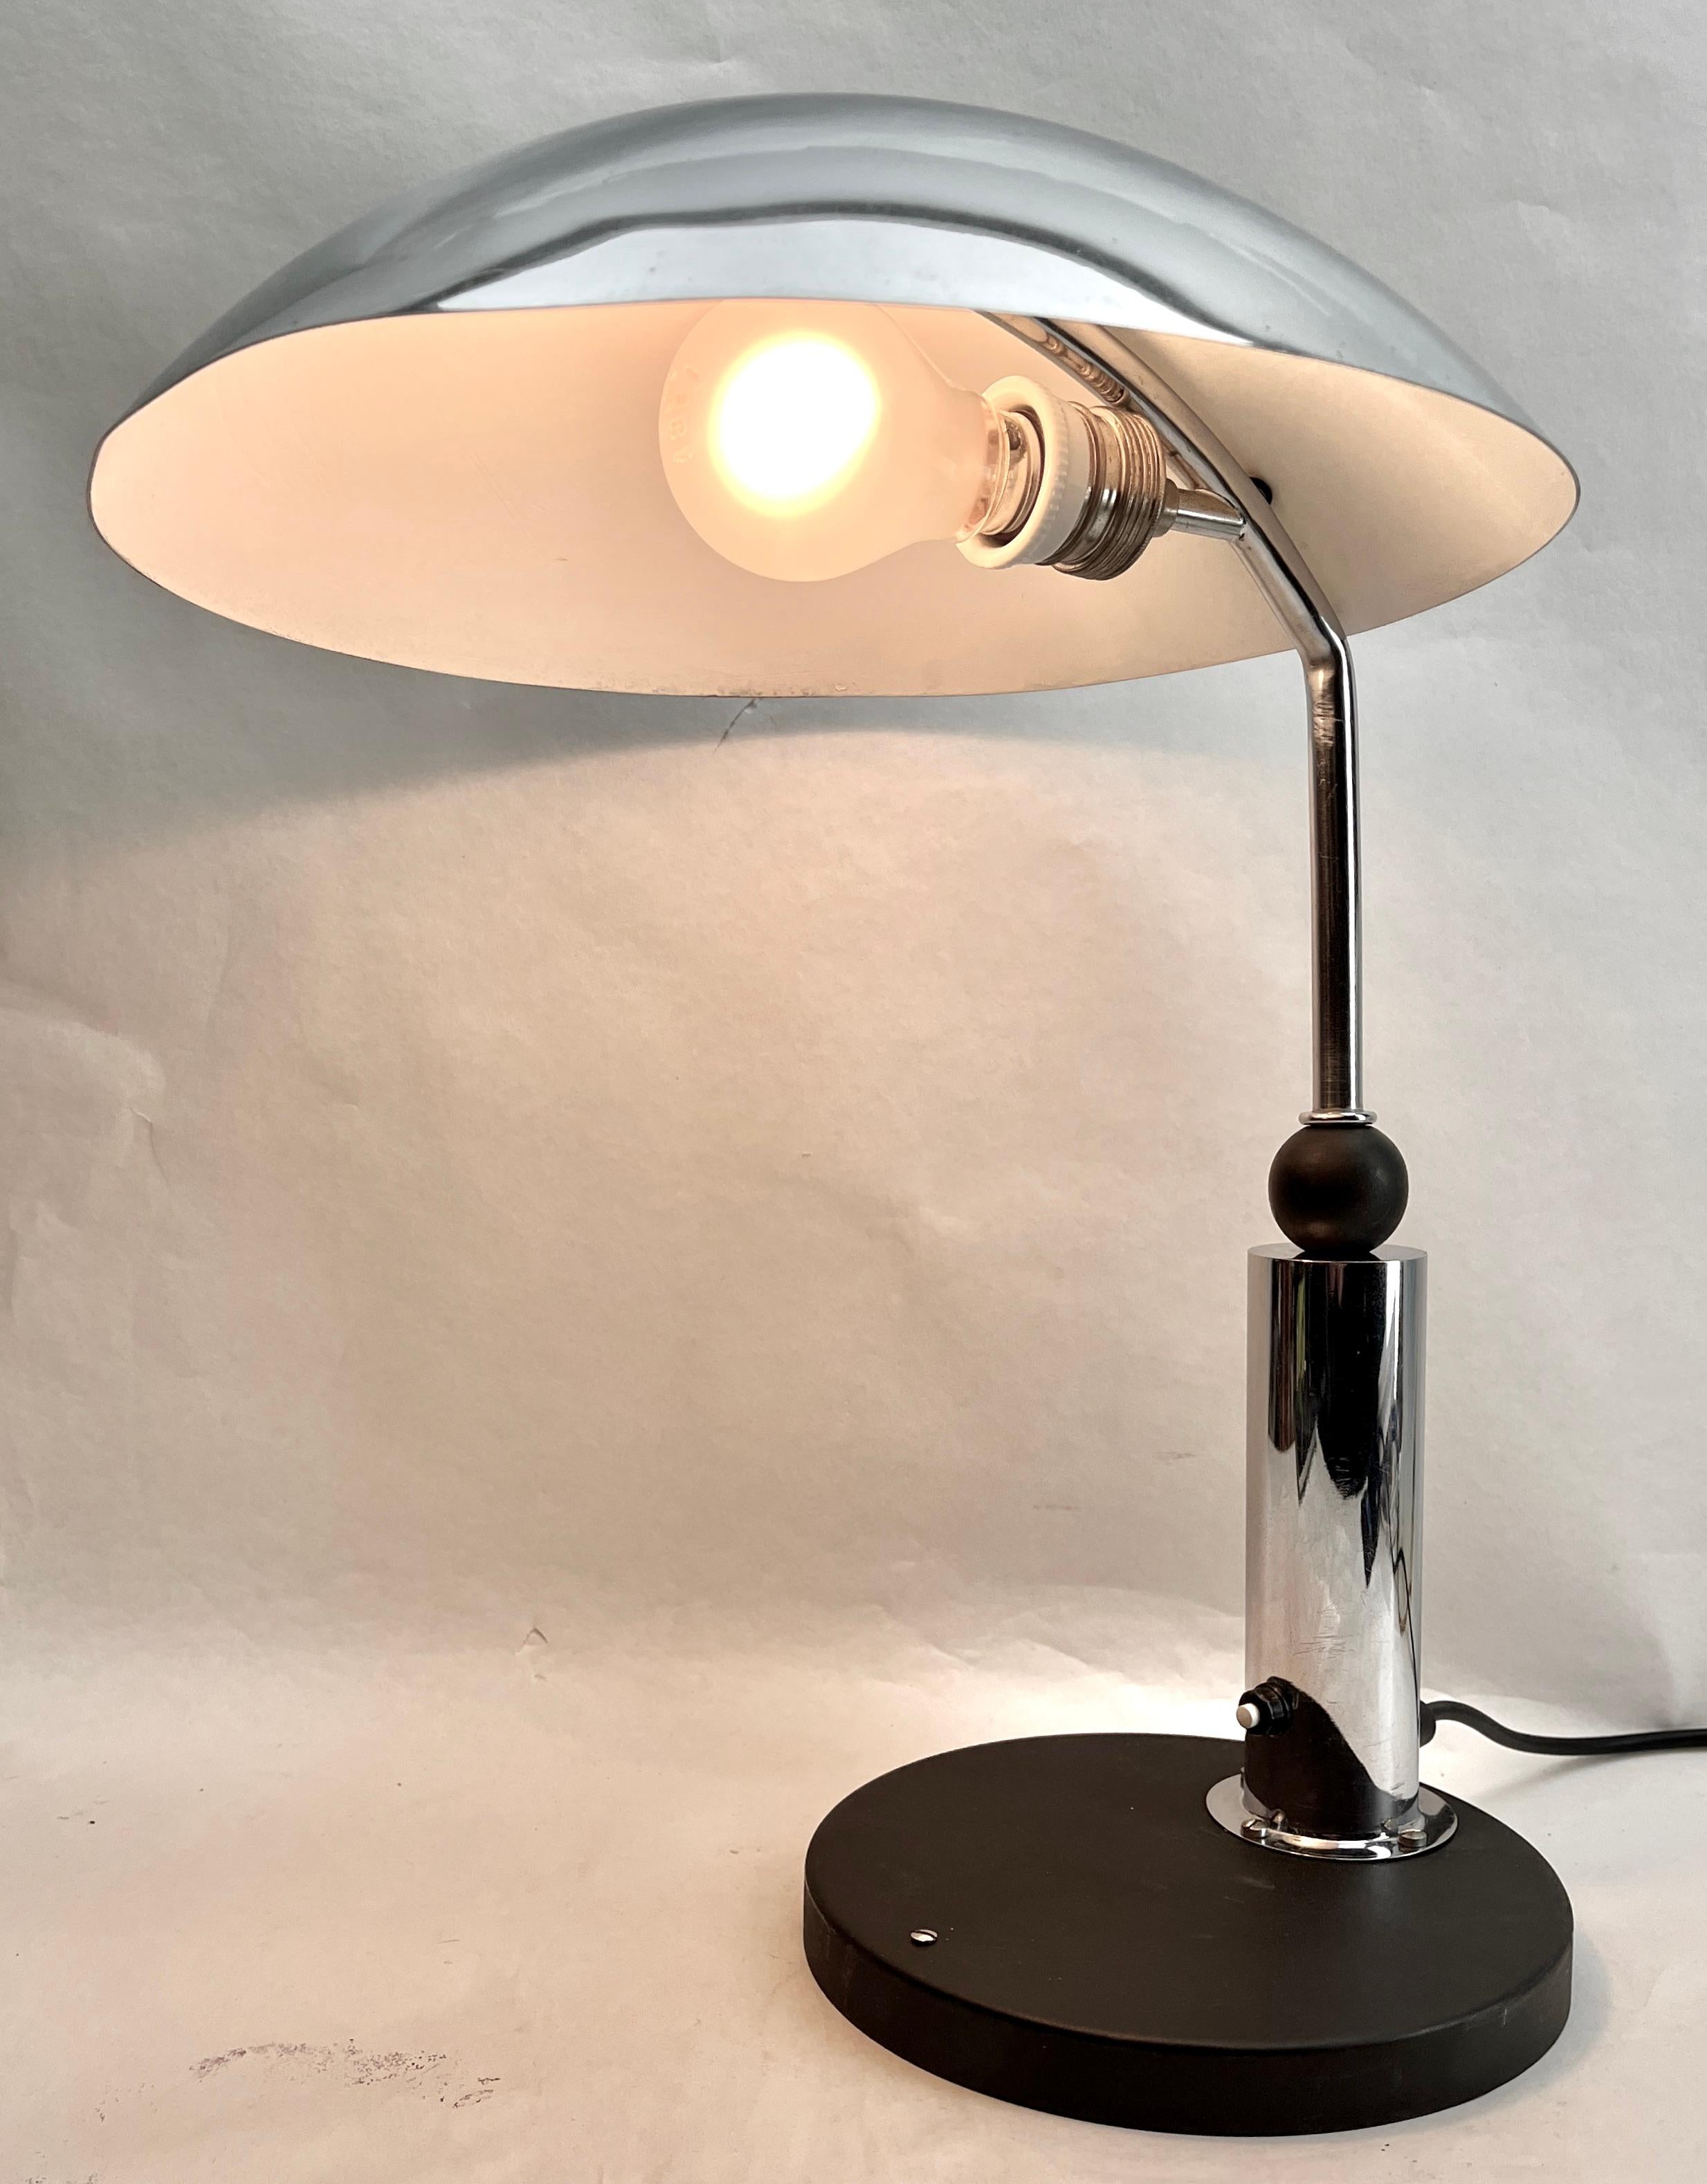 Mid-20th Century  Desk or Side Table Lamp KMD (Daalderop) Tiel Netherlands in Bauhaus style 1930s For Sale